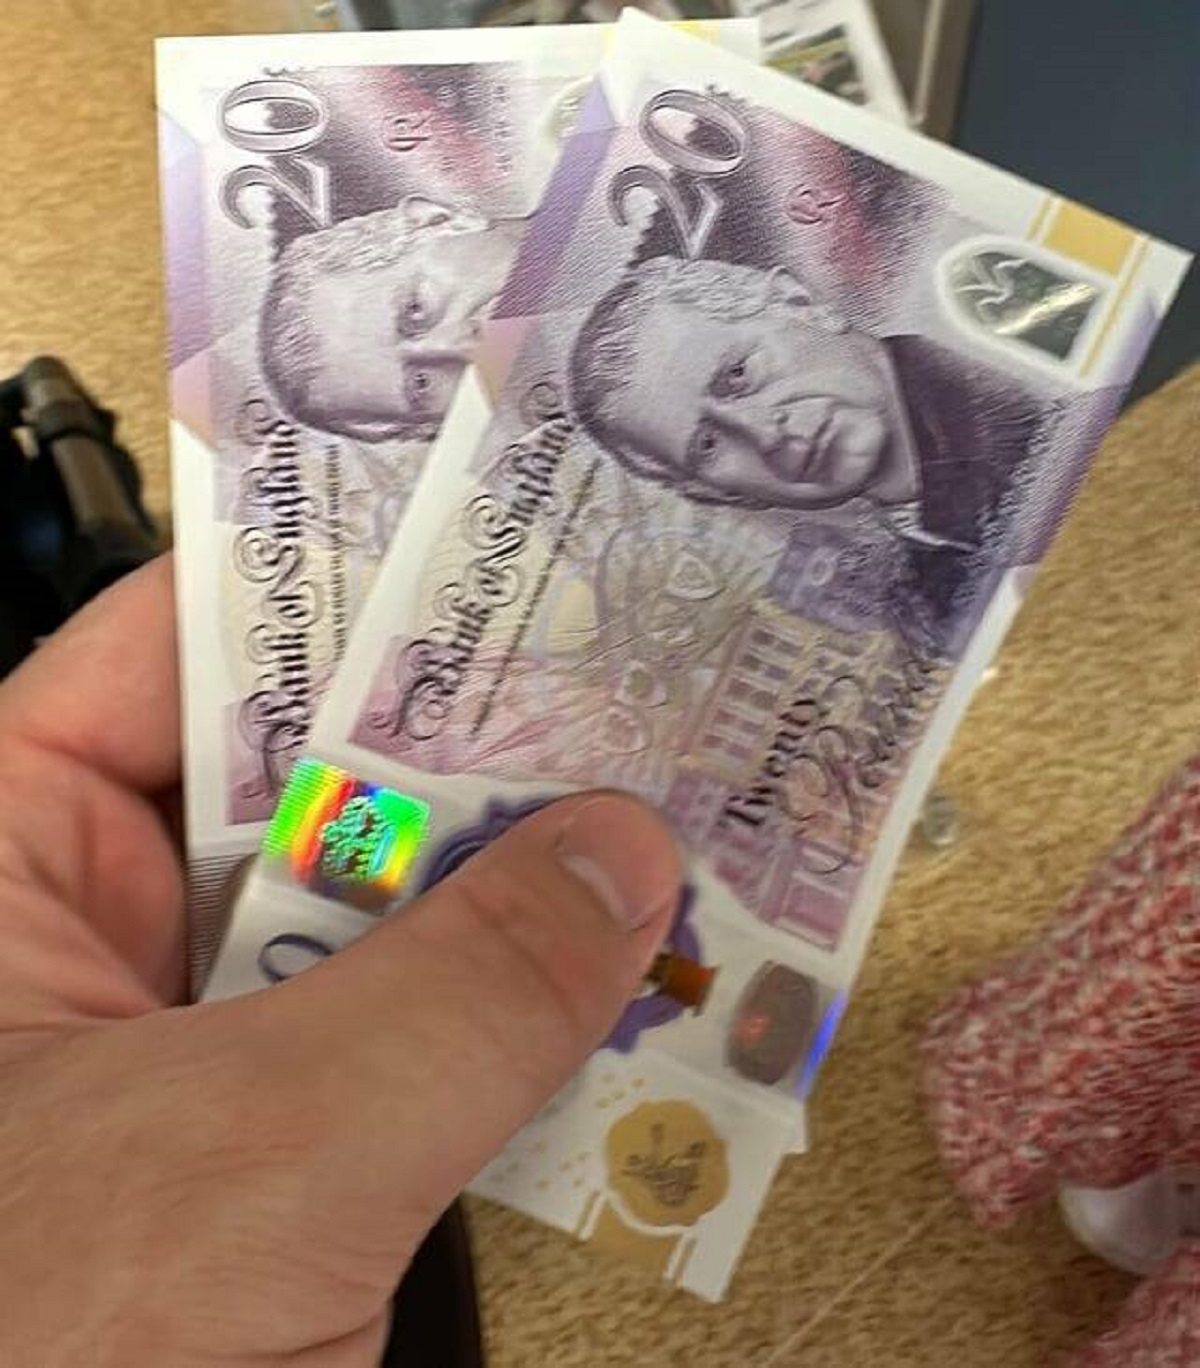 "New £20 notes with King Charles on them"